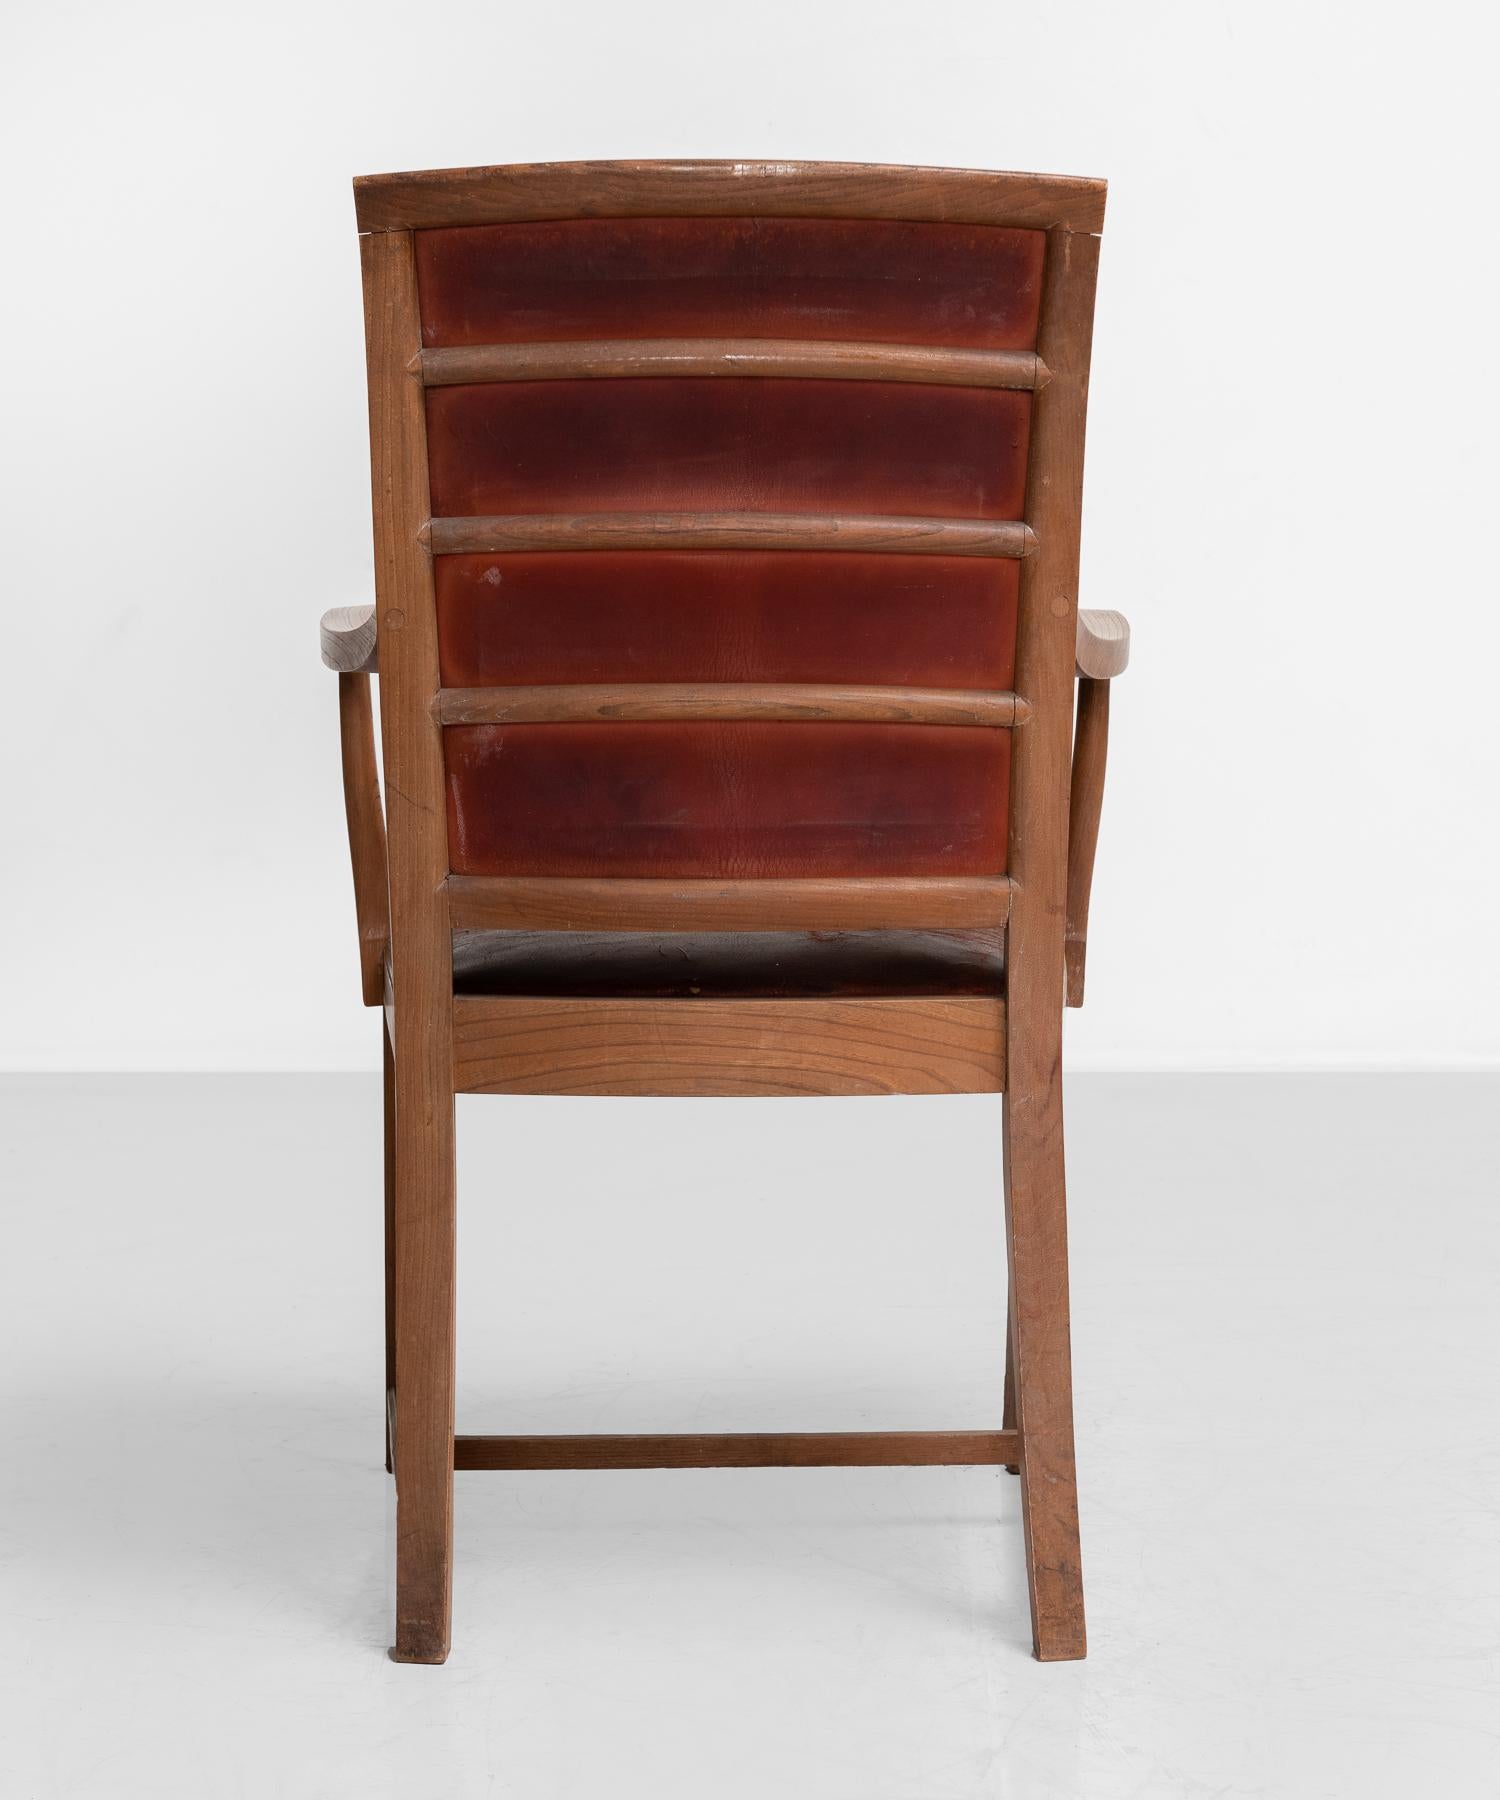 Mid-20th Century Carved Oak and Leather Dining Chairs, England, circa 1930